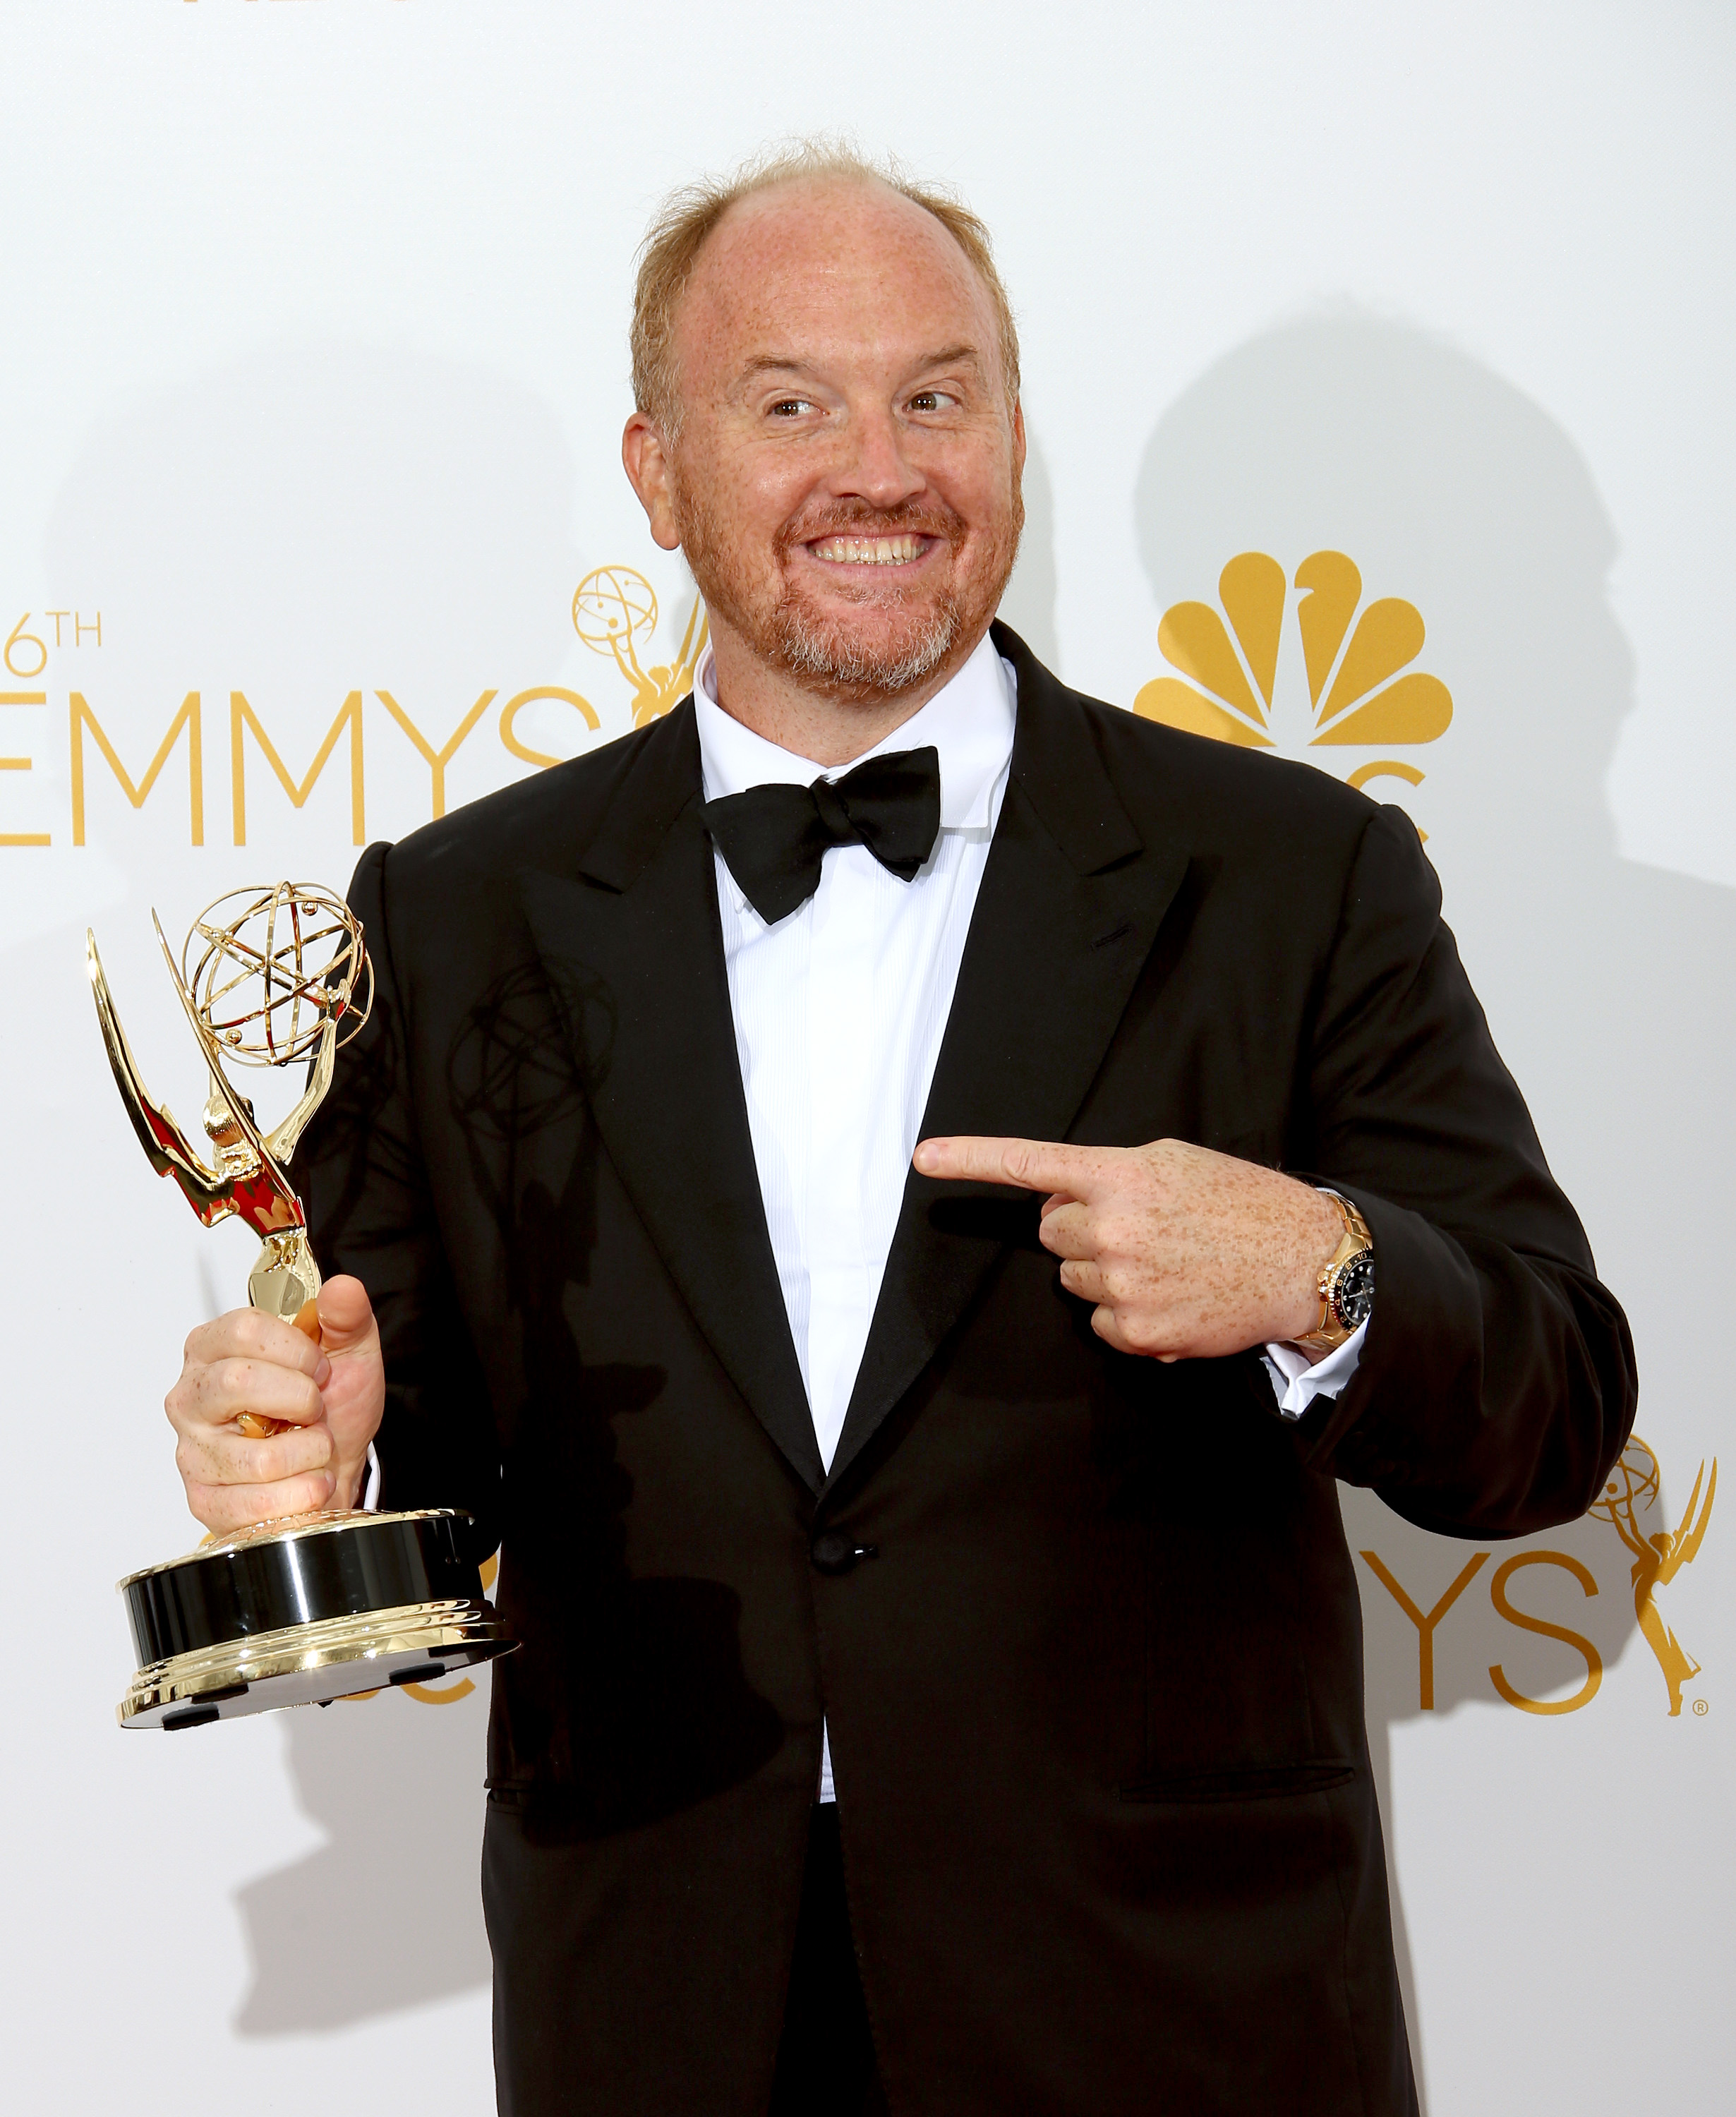 Louis C.K. poses with his award for Outstanding Writing for a Comedy Series for "Louie" at Nokia Theatre L.A. Live on August 25, 2014, in Los Angeles, California. | Source: Getty Images